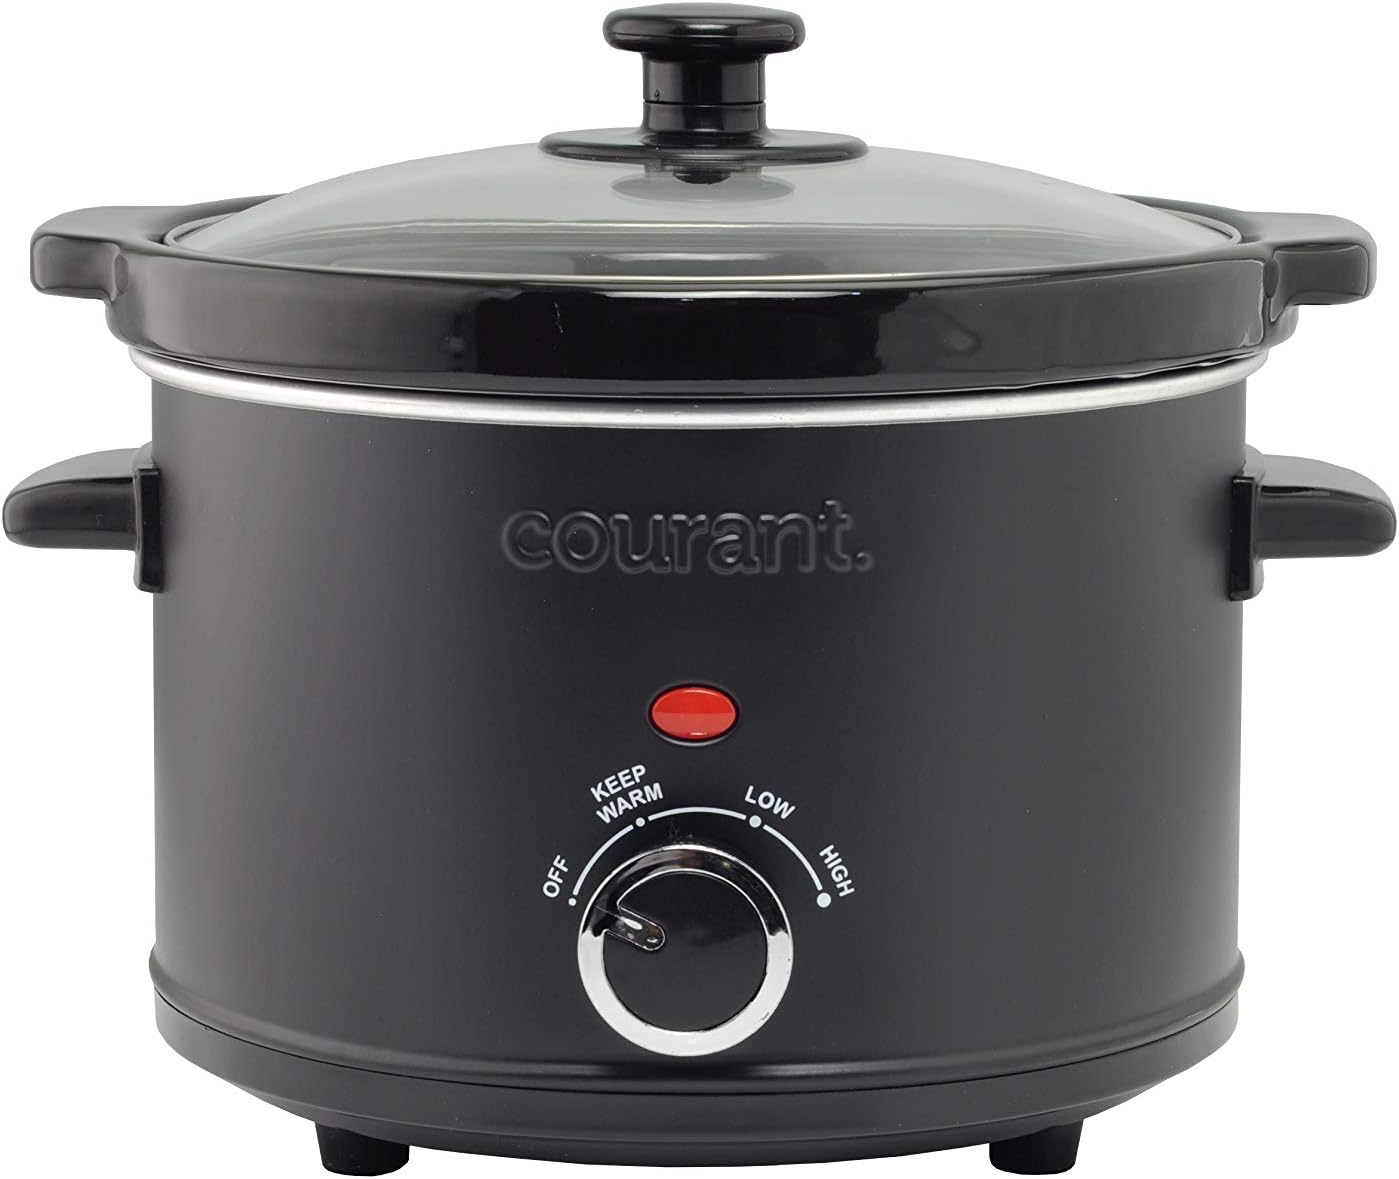 Courant Slow Cooker 2.5 Quart Crock, with Easy Cooking Options, Dishwasher Safe Pot and Glass Lid, Matte Black